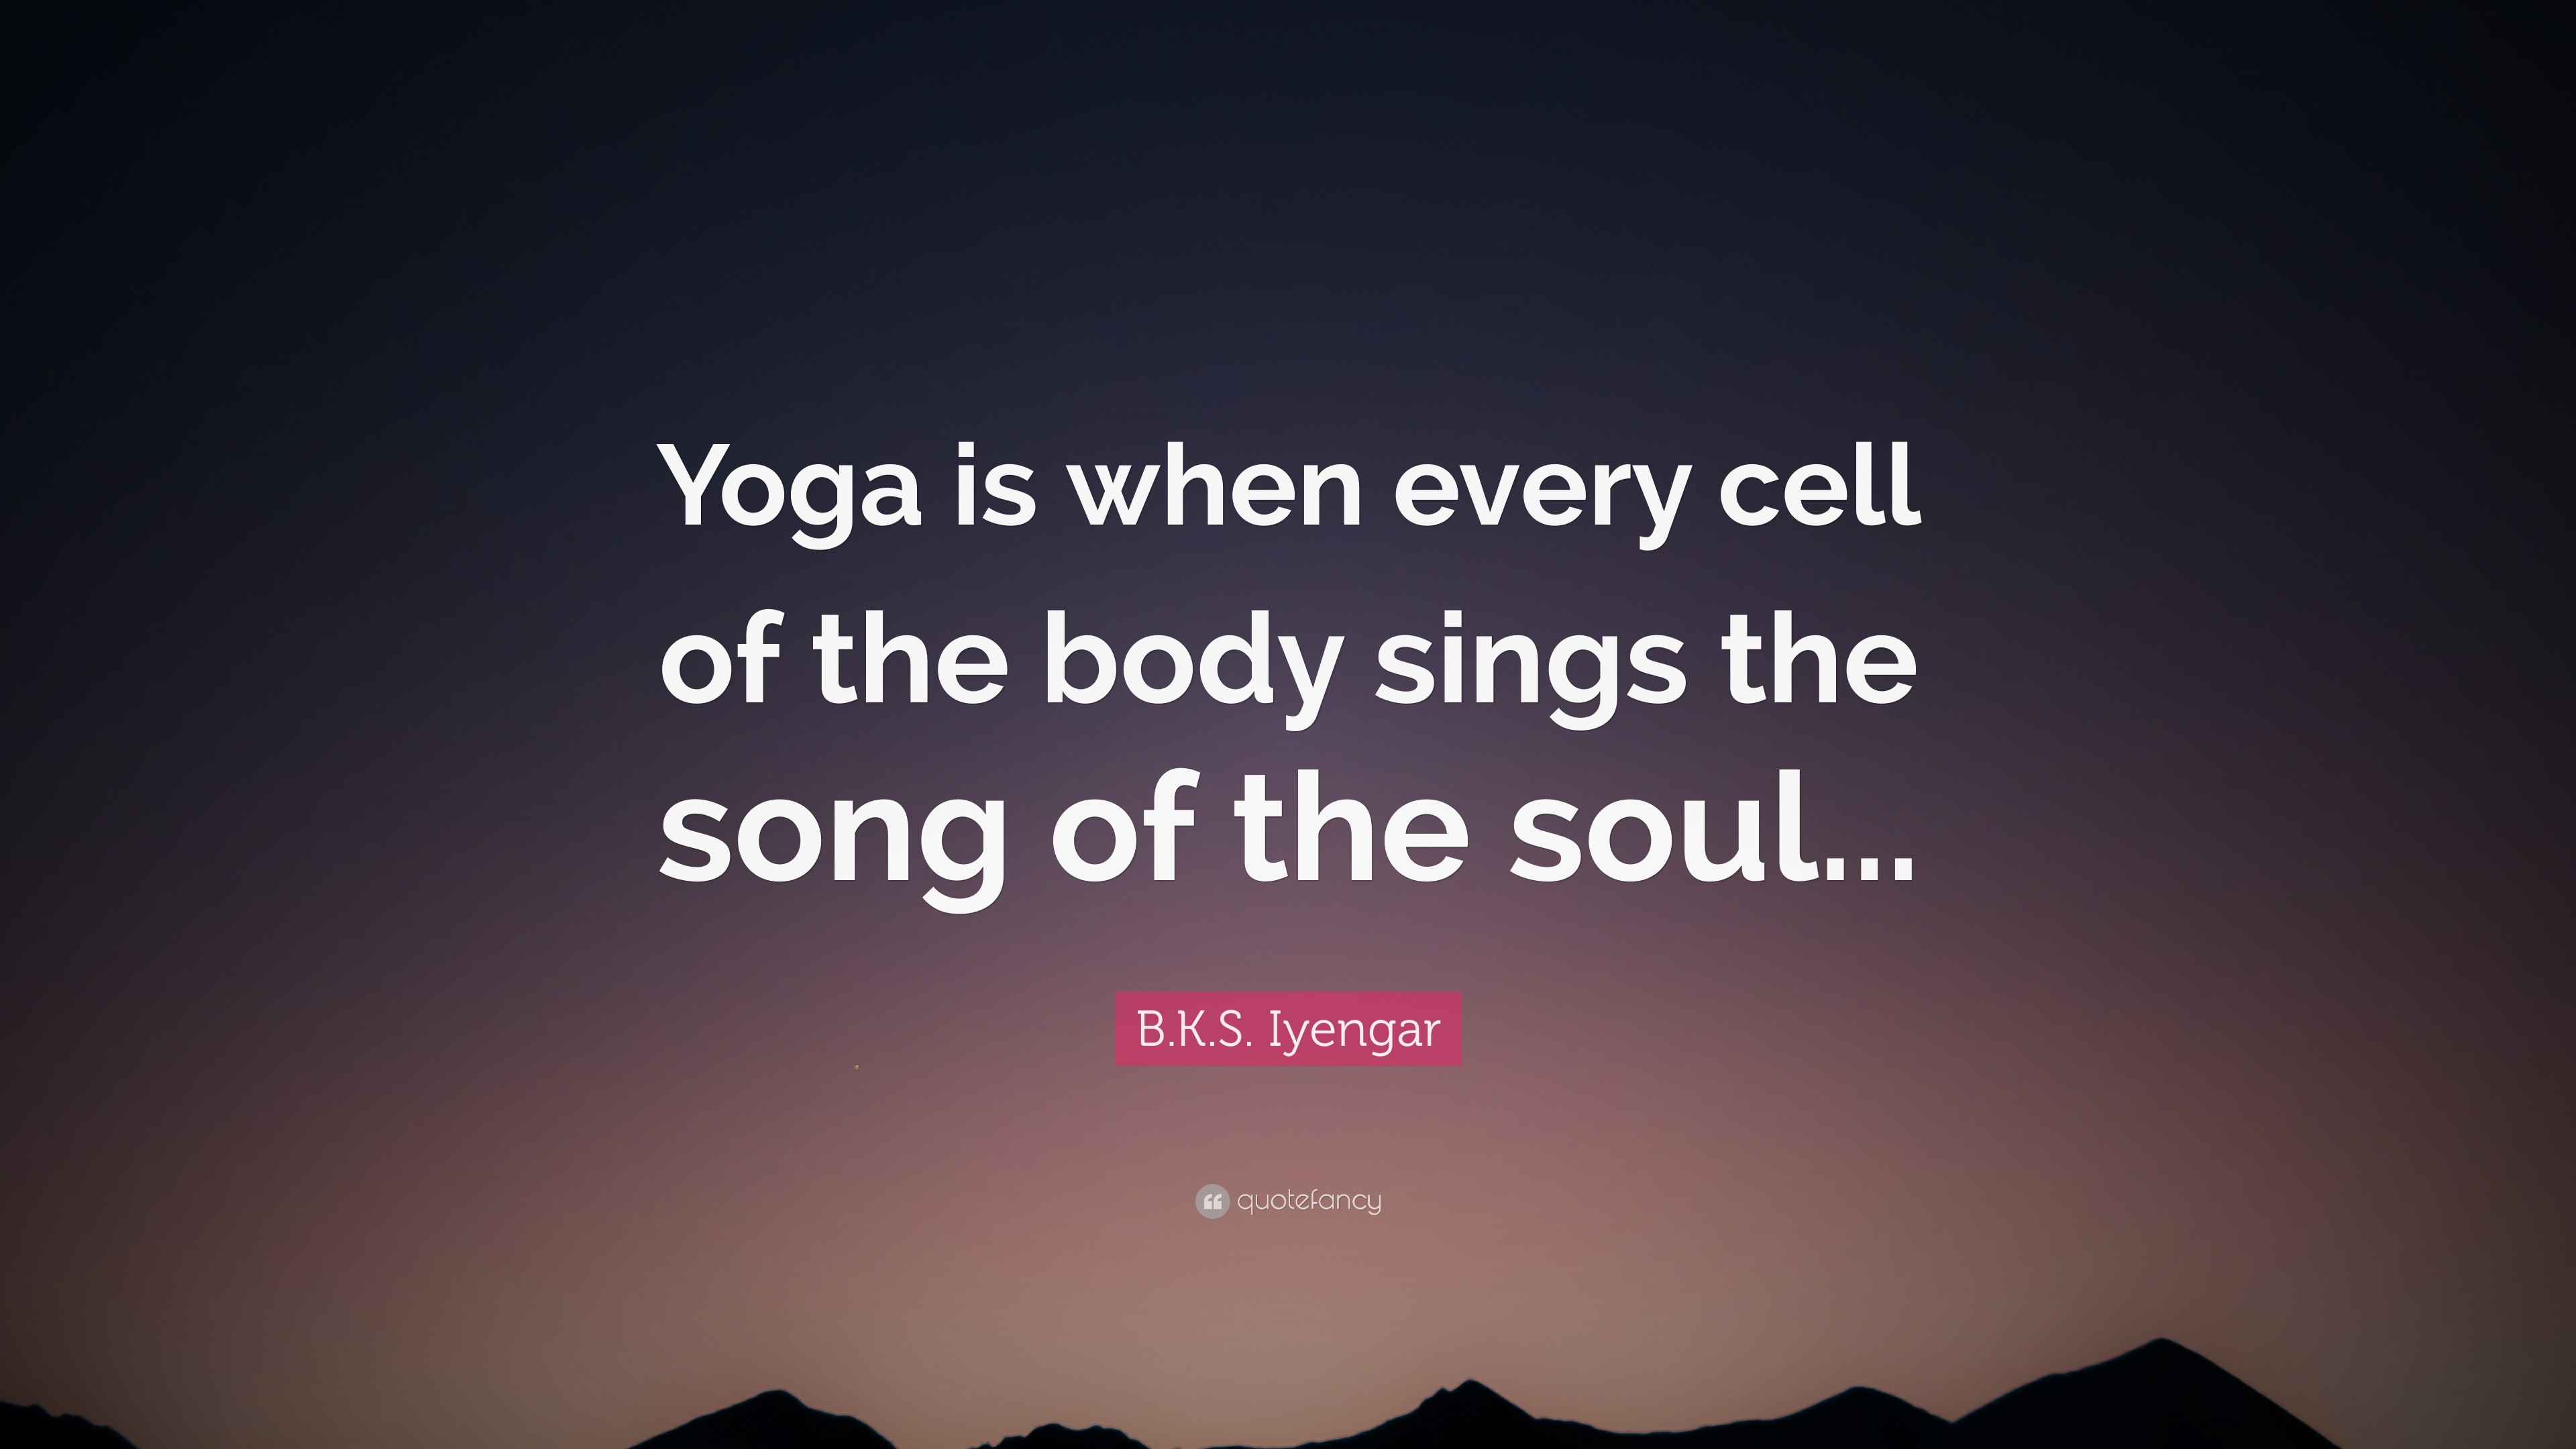 B K S Iyengar Quotes Light On Life
 B K S Iyengar Quote “Yoga is when every cell of the body